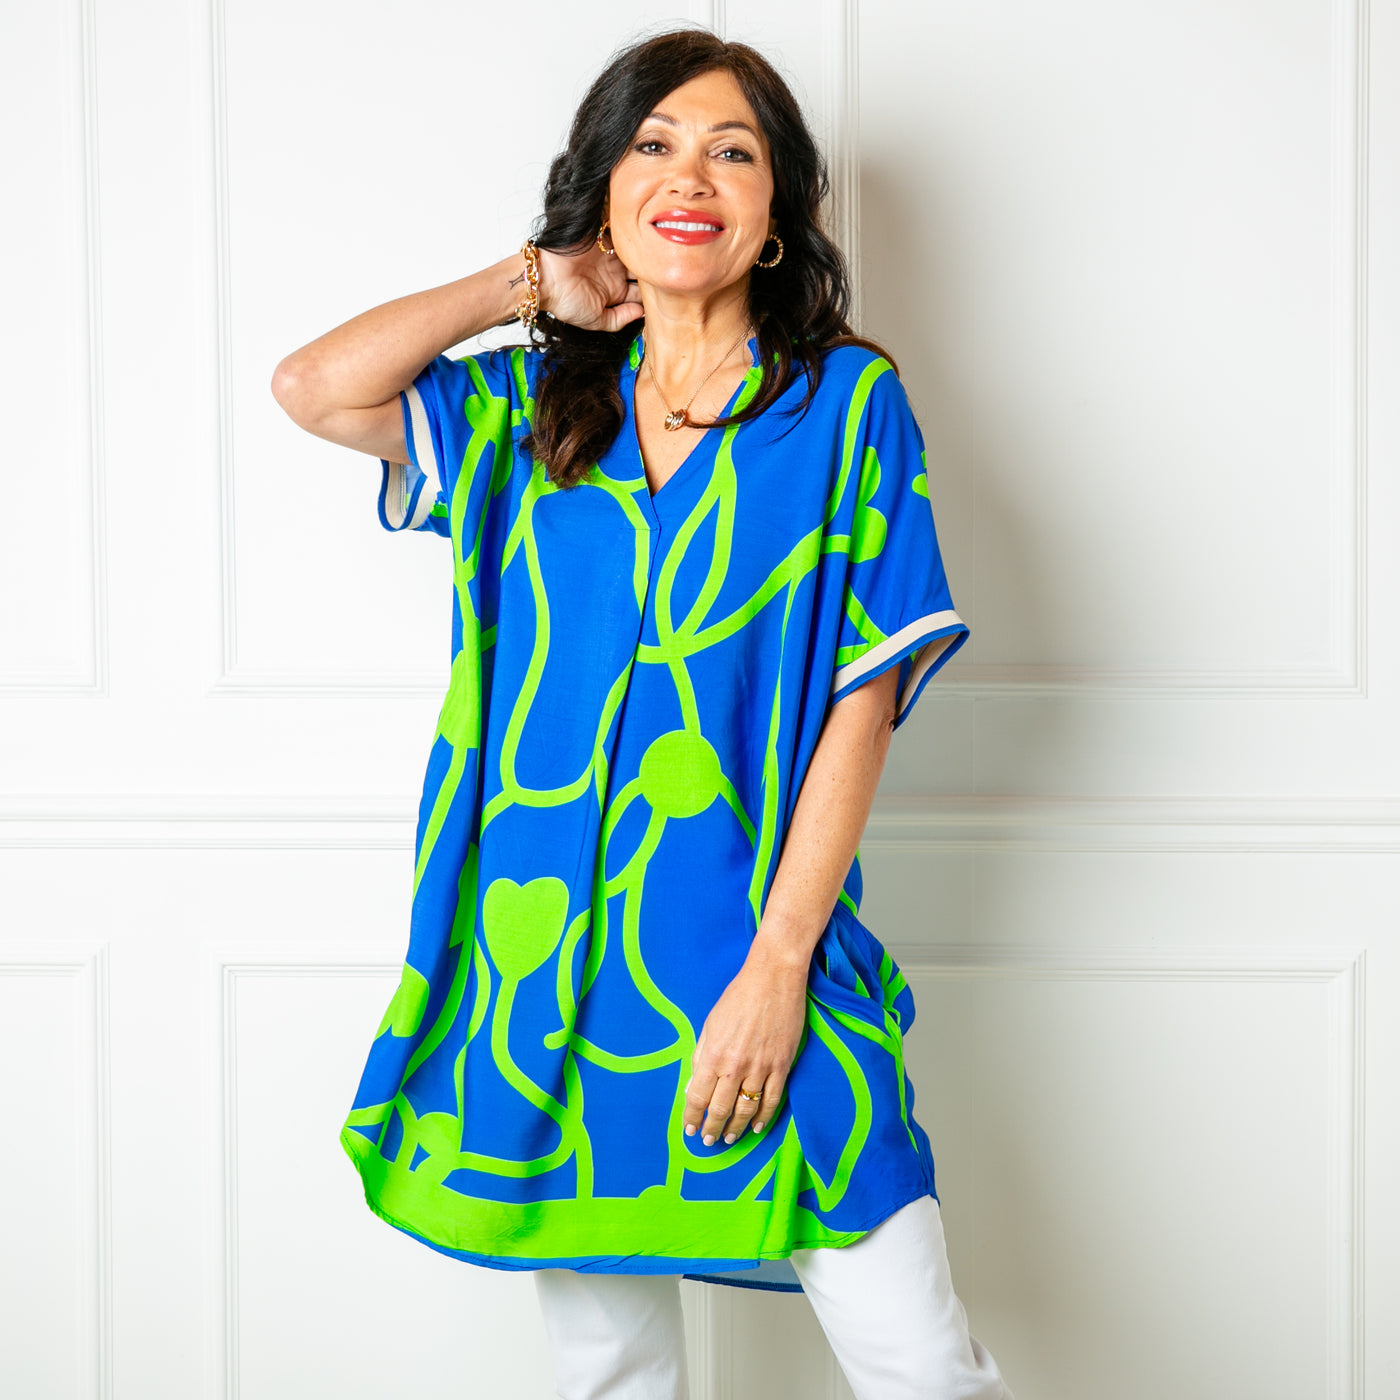 The Royal Blue Vine Short Sleeved Tunic Dress with accents of green